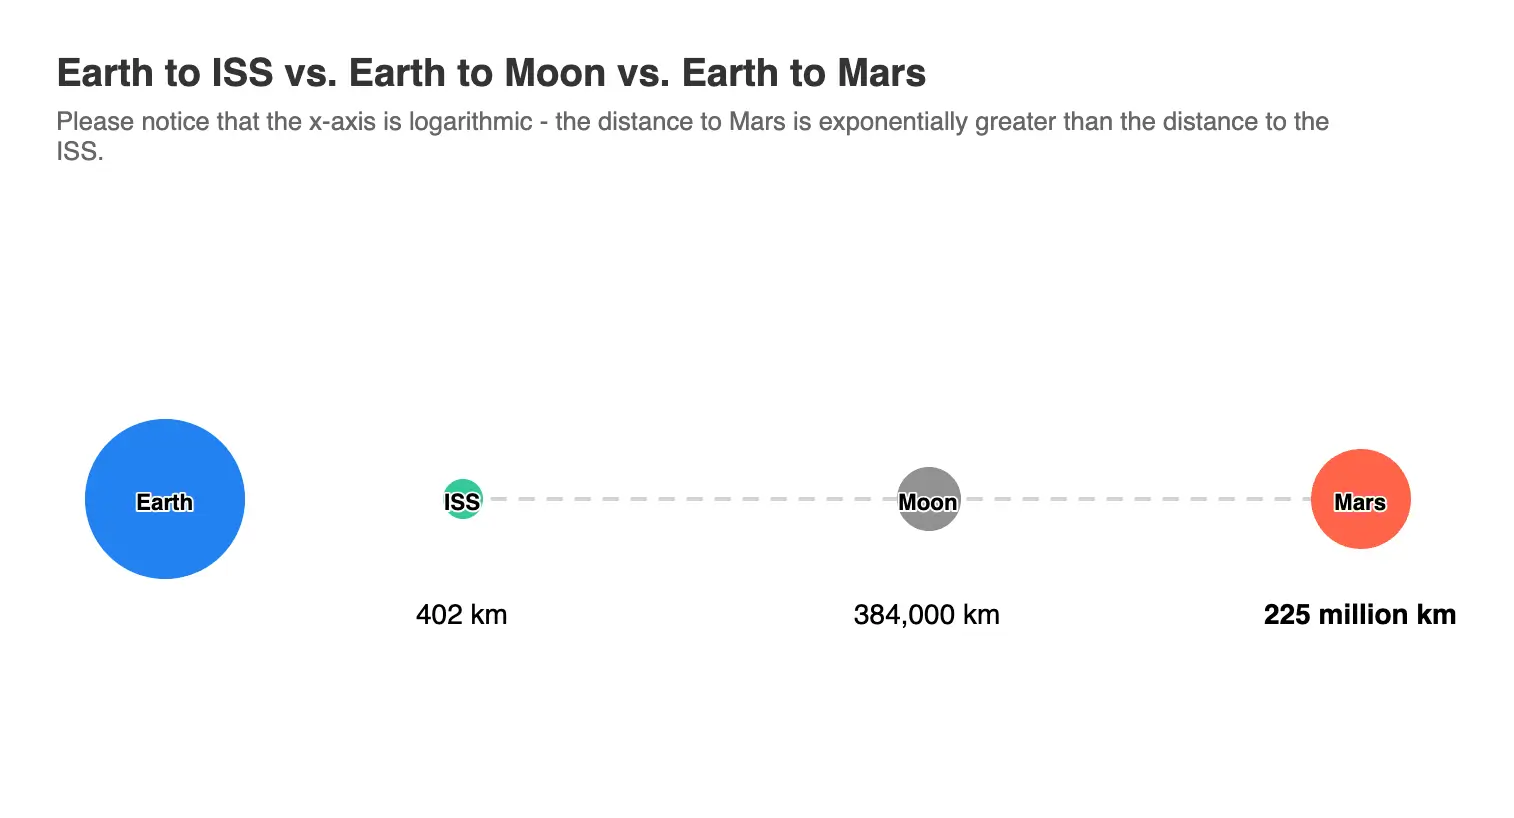 An interactive chart showing the distance between the Earth, ISS, Moon and Mars.